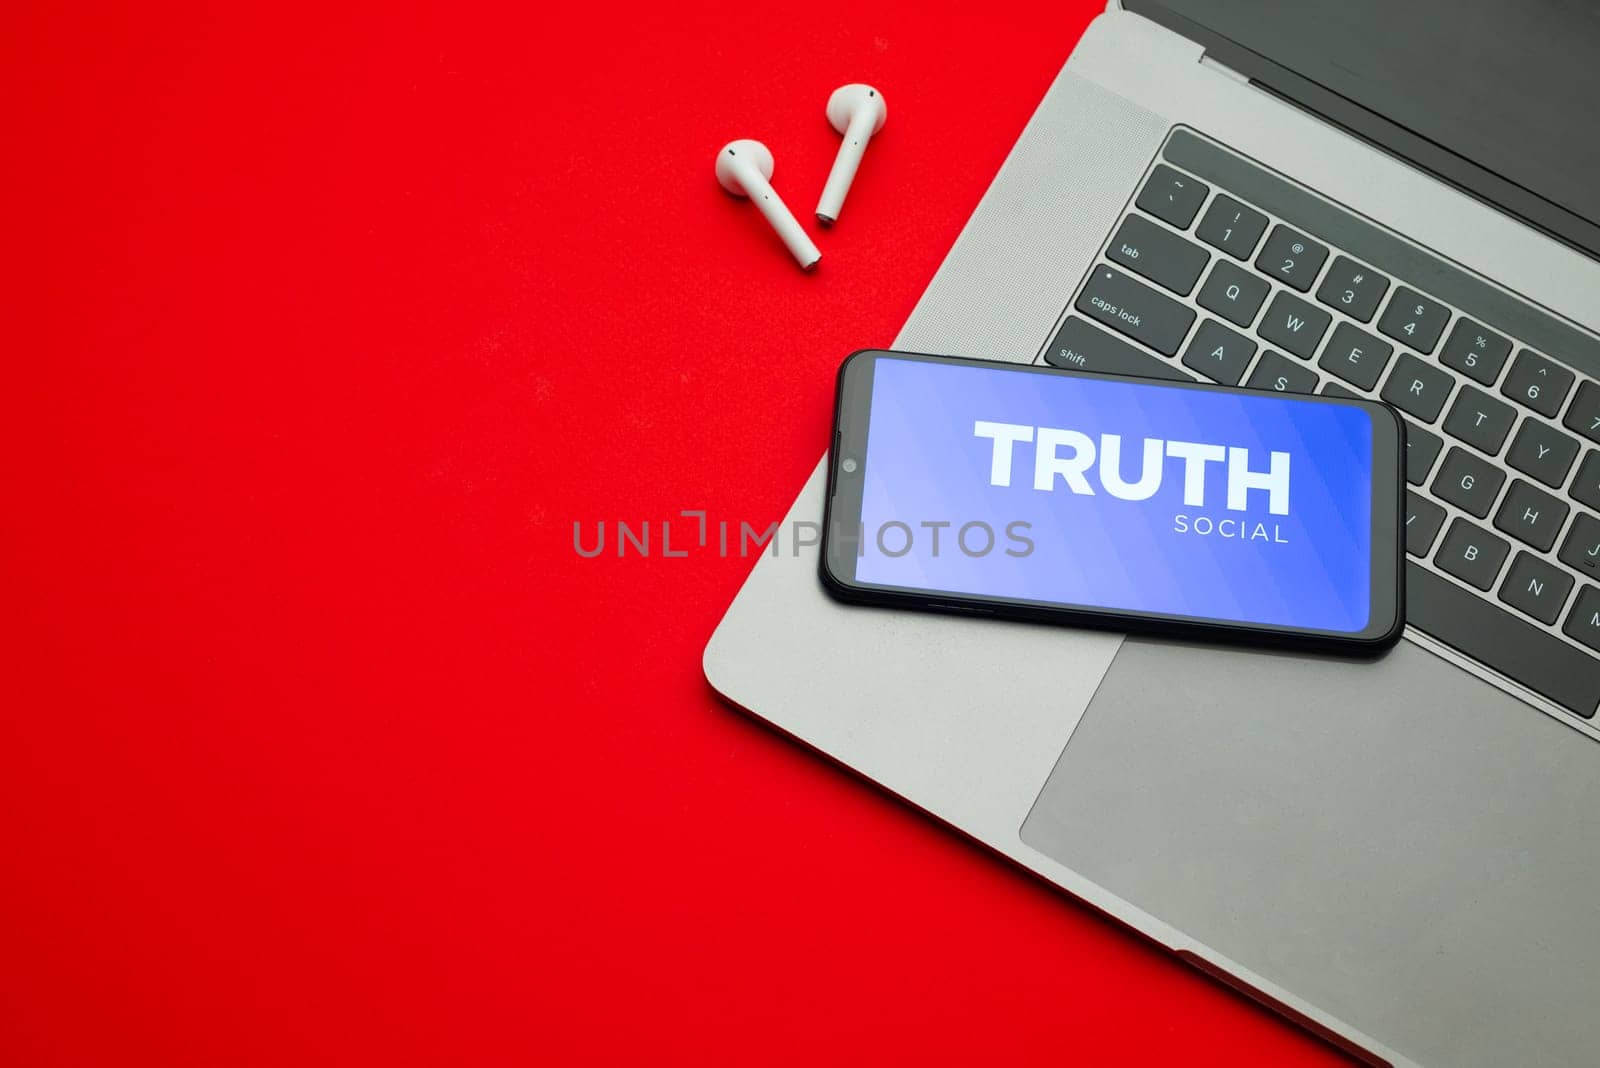 Tula, Russia - Jan 10, 2022: Truth Social app logo on smartphone screen on red background. New social media platform from Donald Trump.